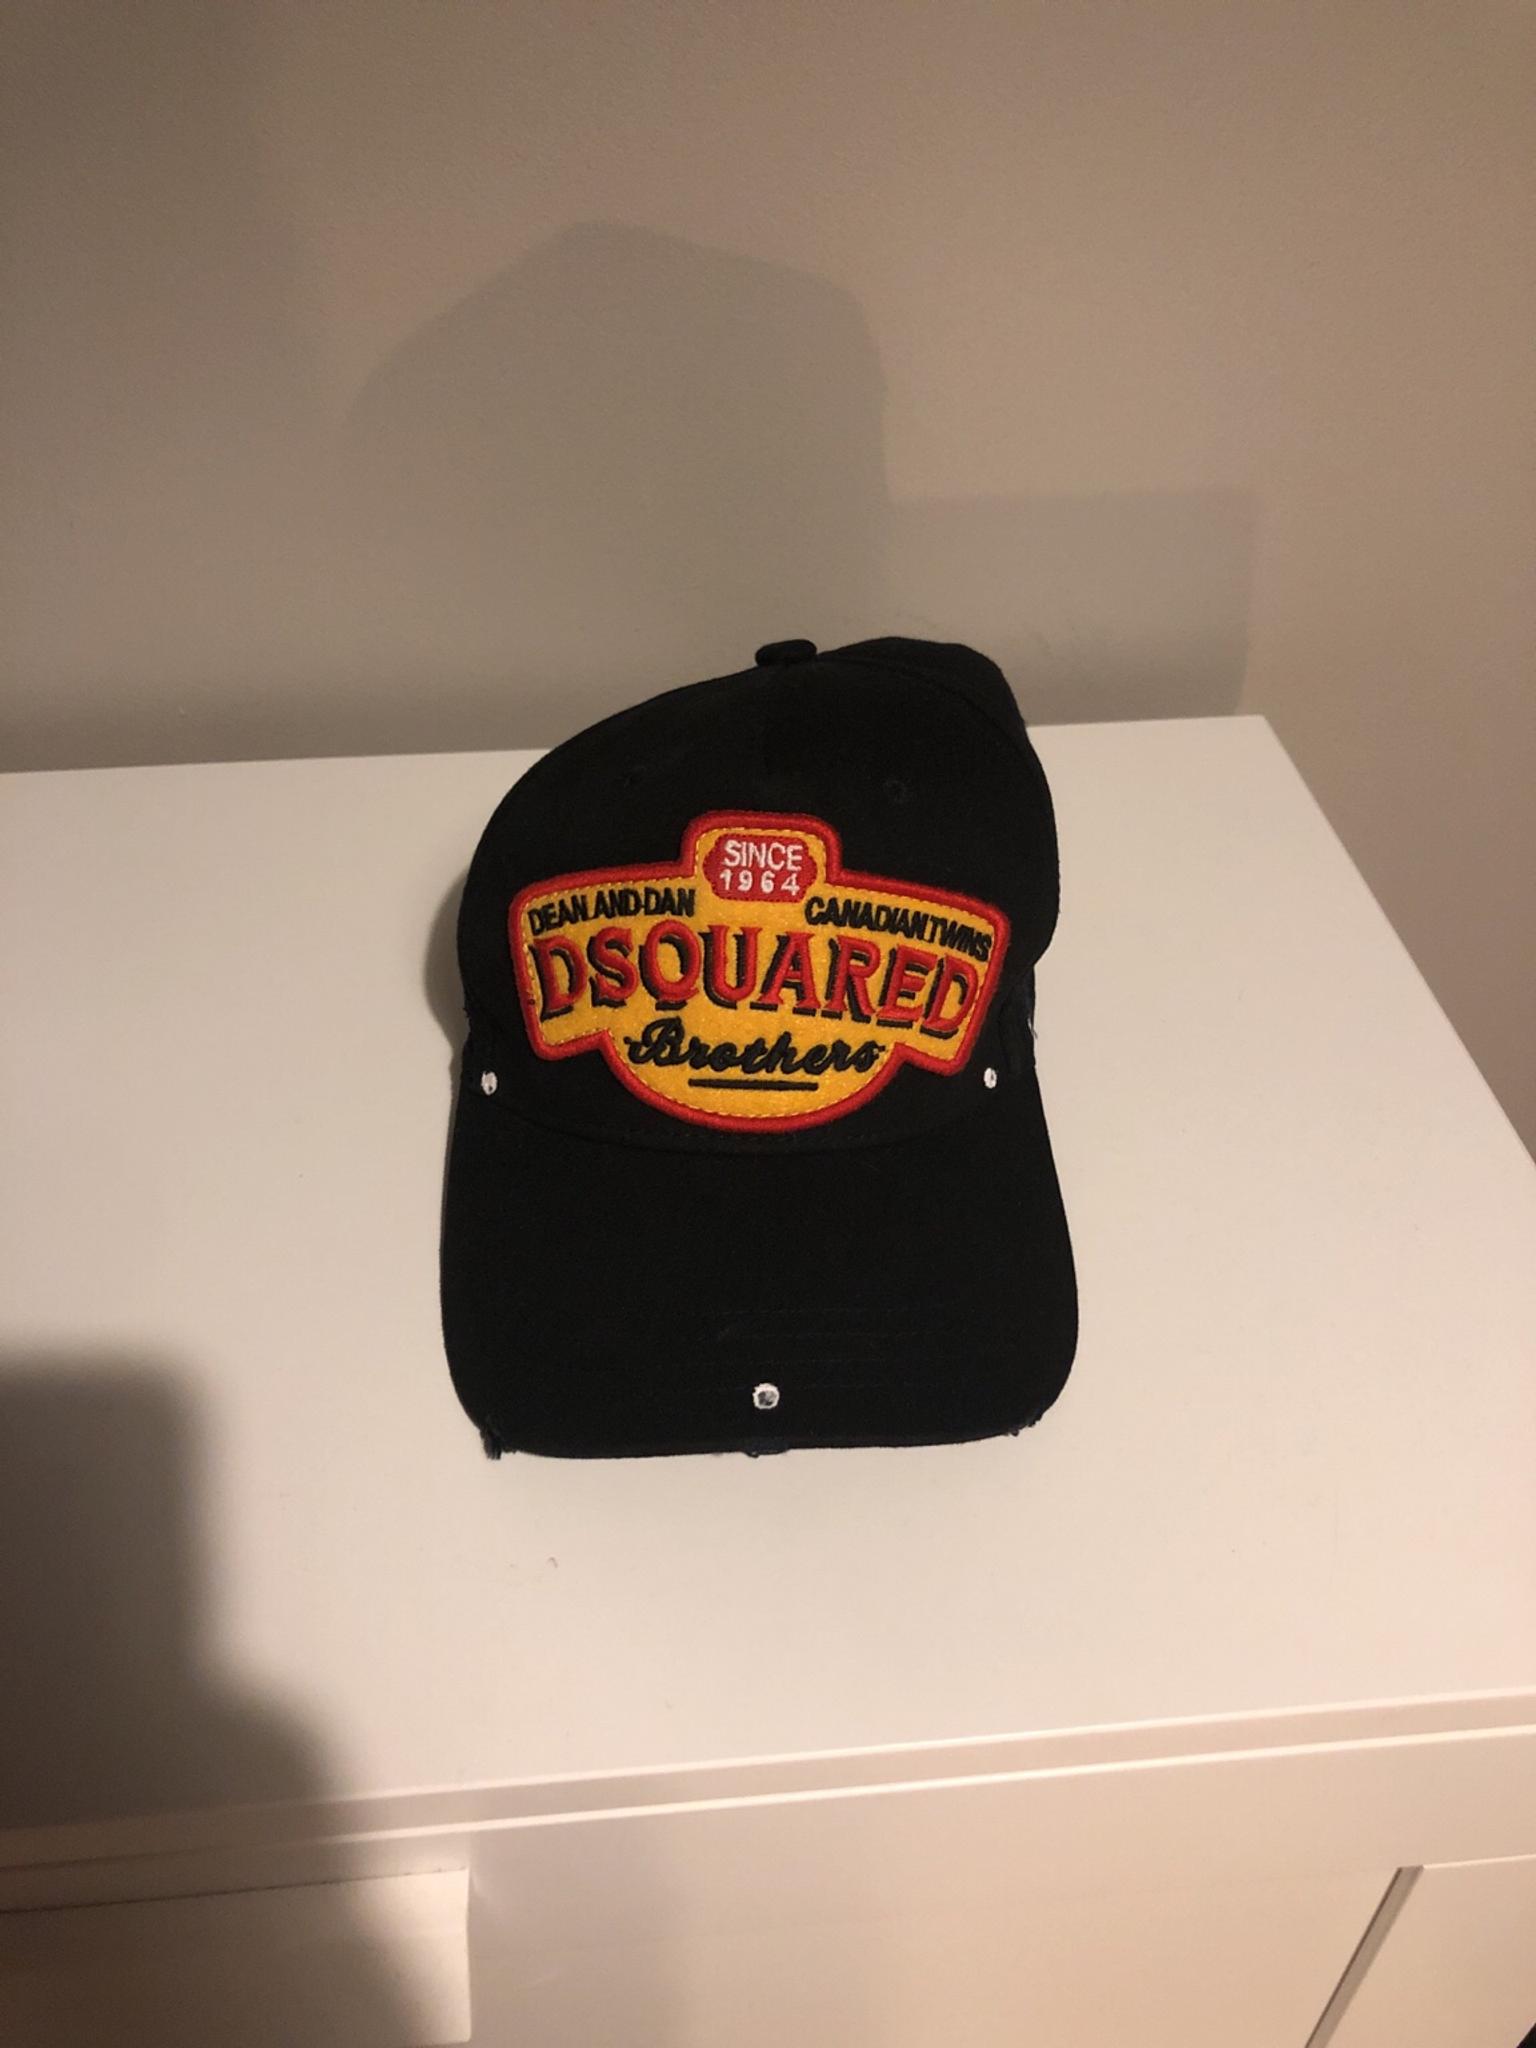 how to spot fake dsquared cap